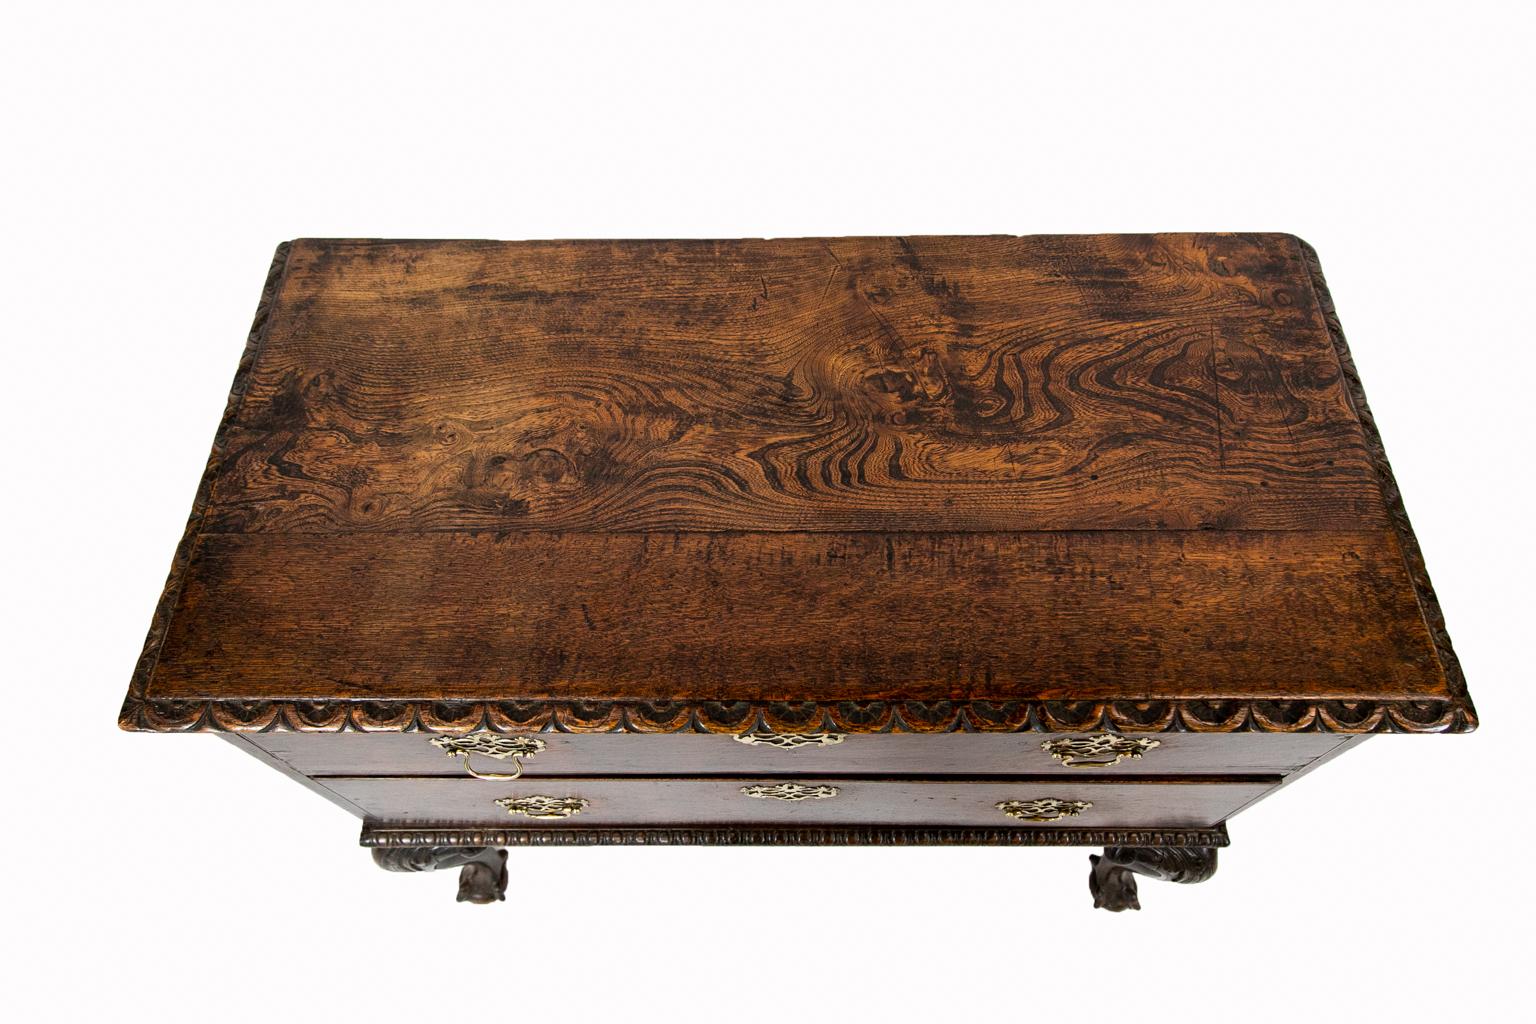 Carved English oak two-drawer chest on legs has carved top molding while the base has egg and dart molding on acanthus carved cabriole legs, which terminate in ball and claw feet. There is exceptionally nice trellis work hardware.
 